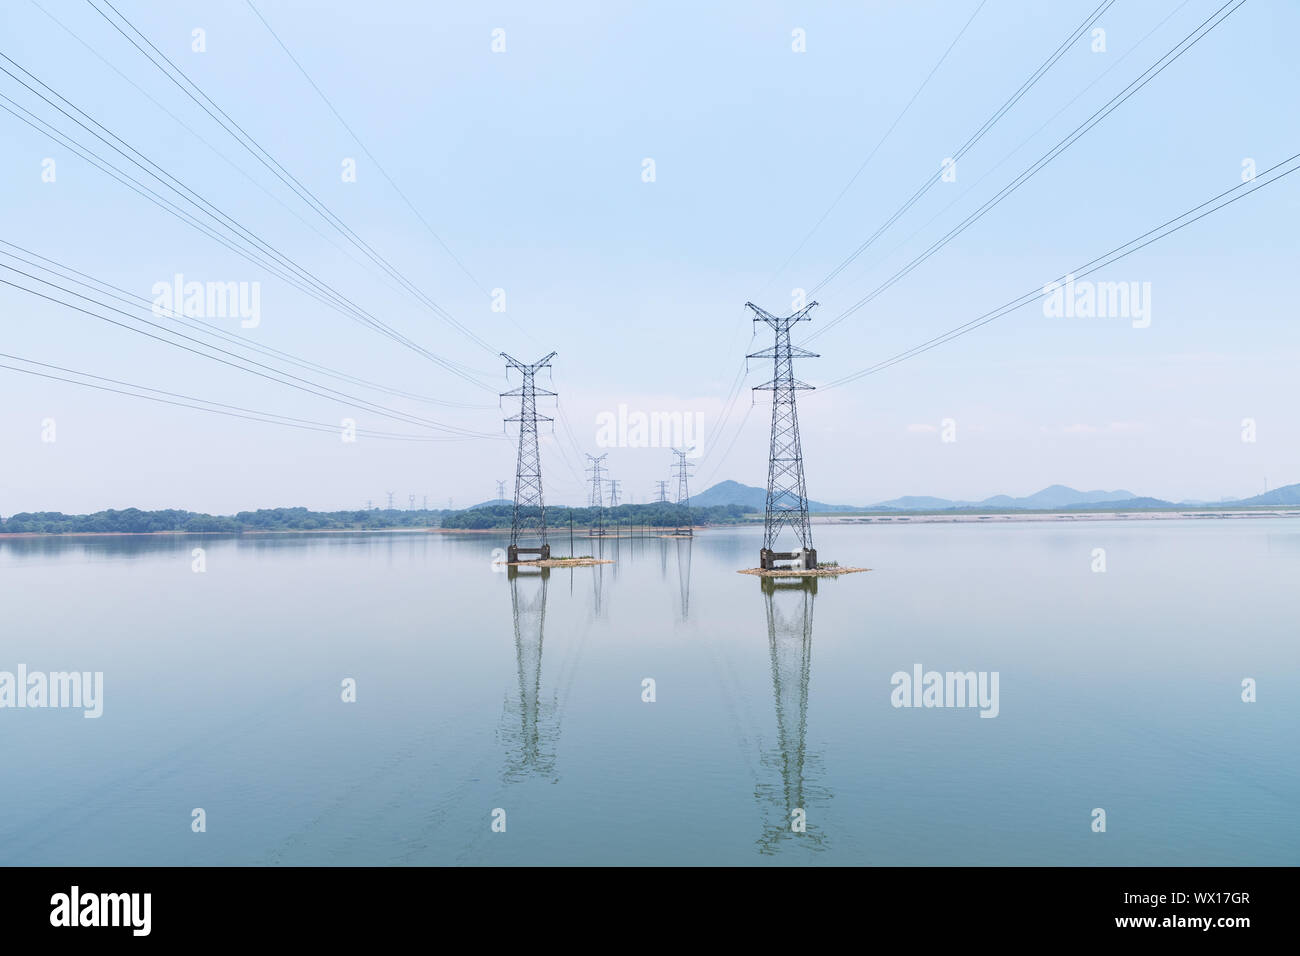 power transmission tower on water Stock Photo